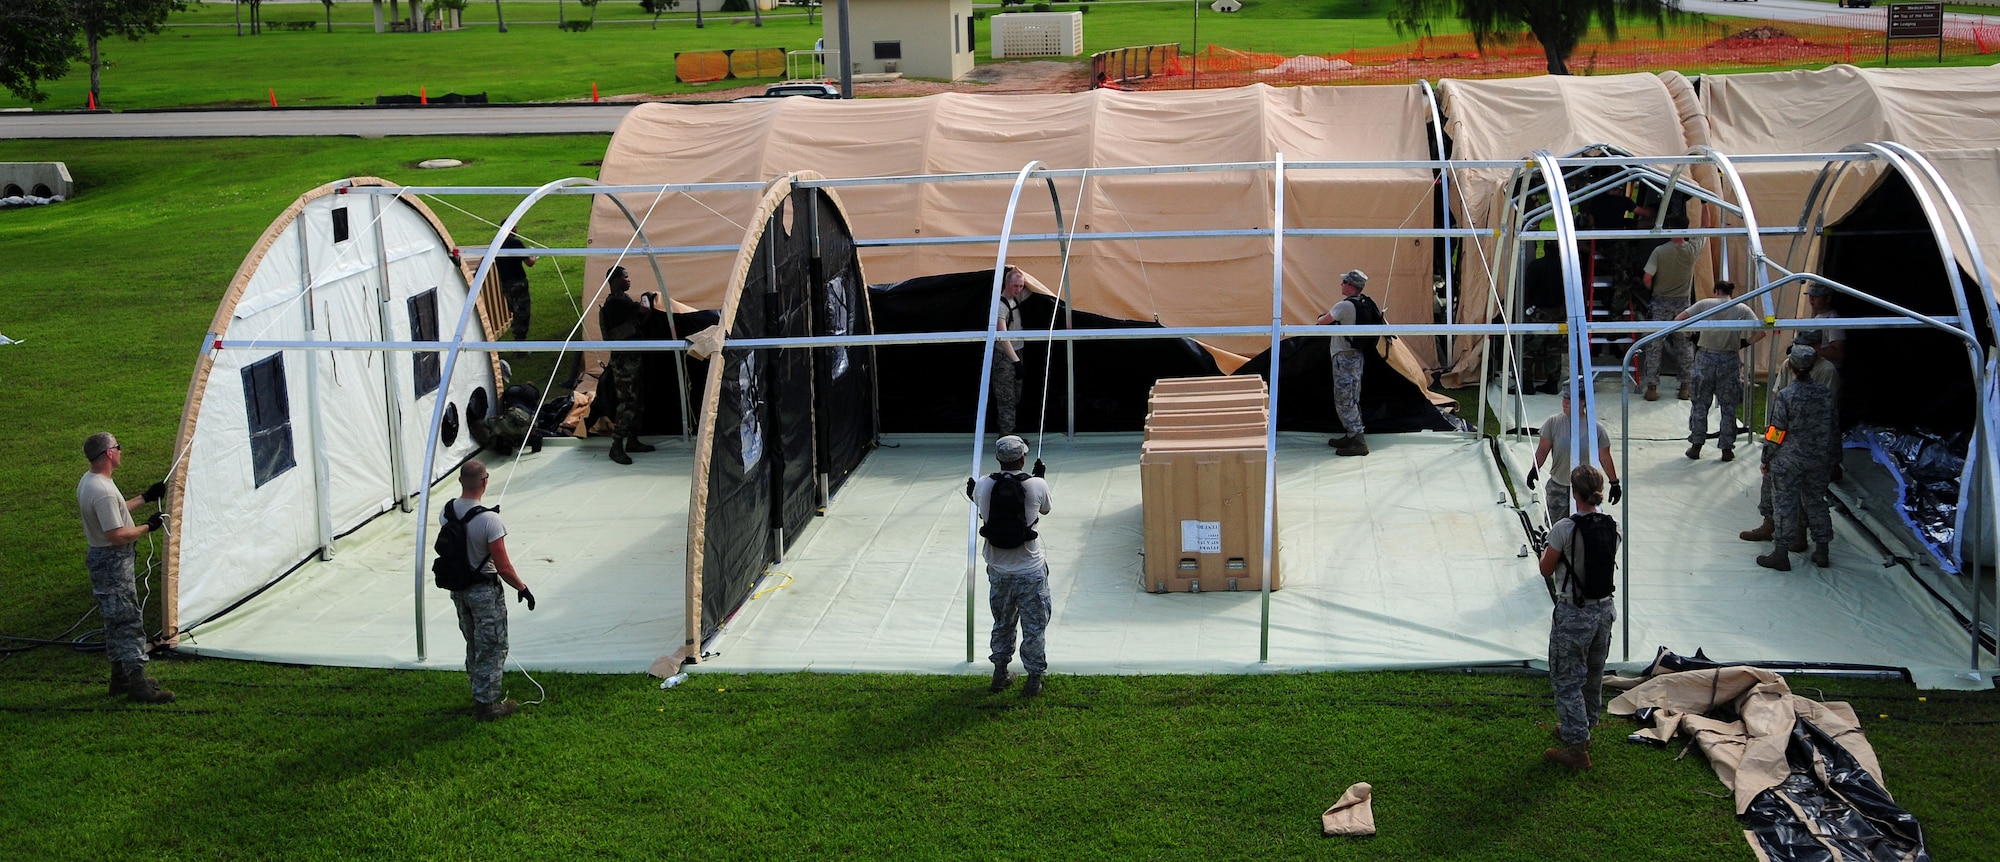 ANDERSEN AIR FORCE BASE, Guam - The 36th Medical Group and the 36th Contingency Response Group work together to construct operational tents during a simulated exercise for the Humanitarian Assistance Rapid Response Team here July 15. The HARRT is equipped to operate in an austere permissive environment during Phase III of disaster relief operations, supporting 350 to 500 patients per day and can be fully operational within six hours of arrival at the disaster site. (U.S. Air Force photo by Airman 1st Class Courtney Witt)